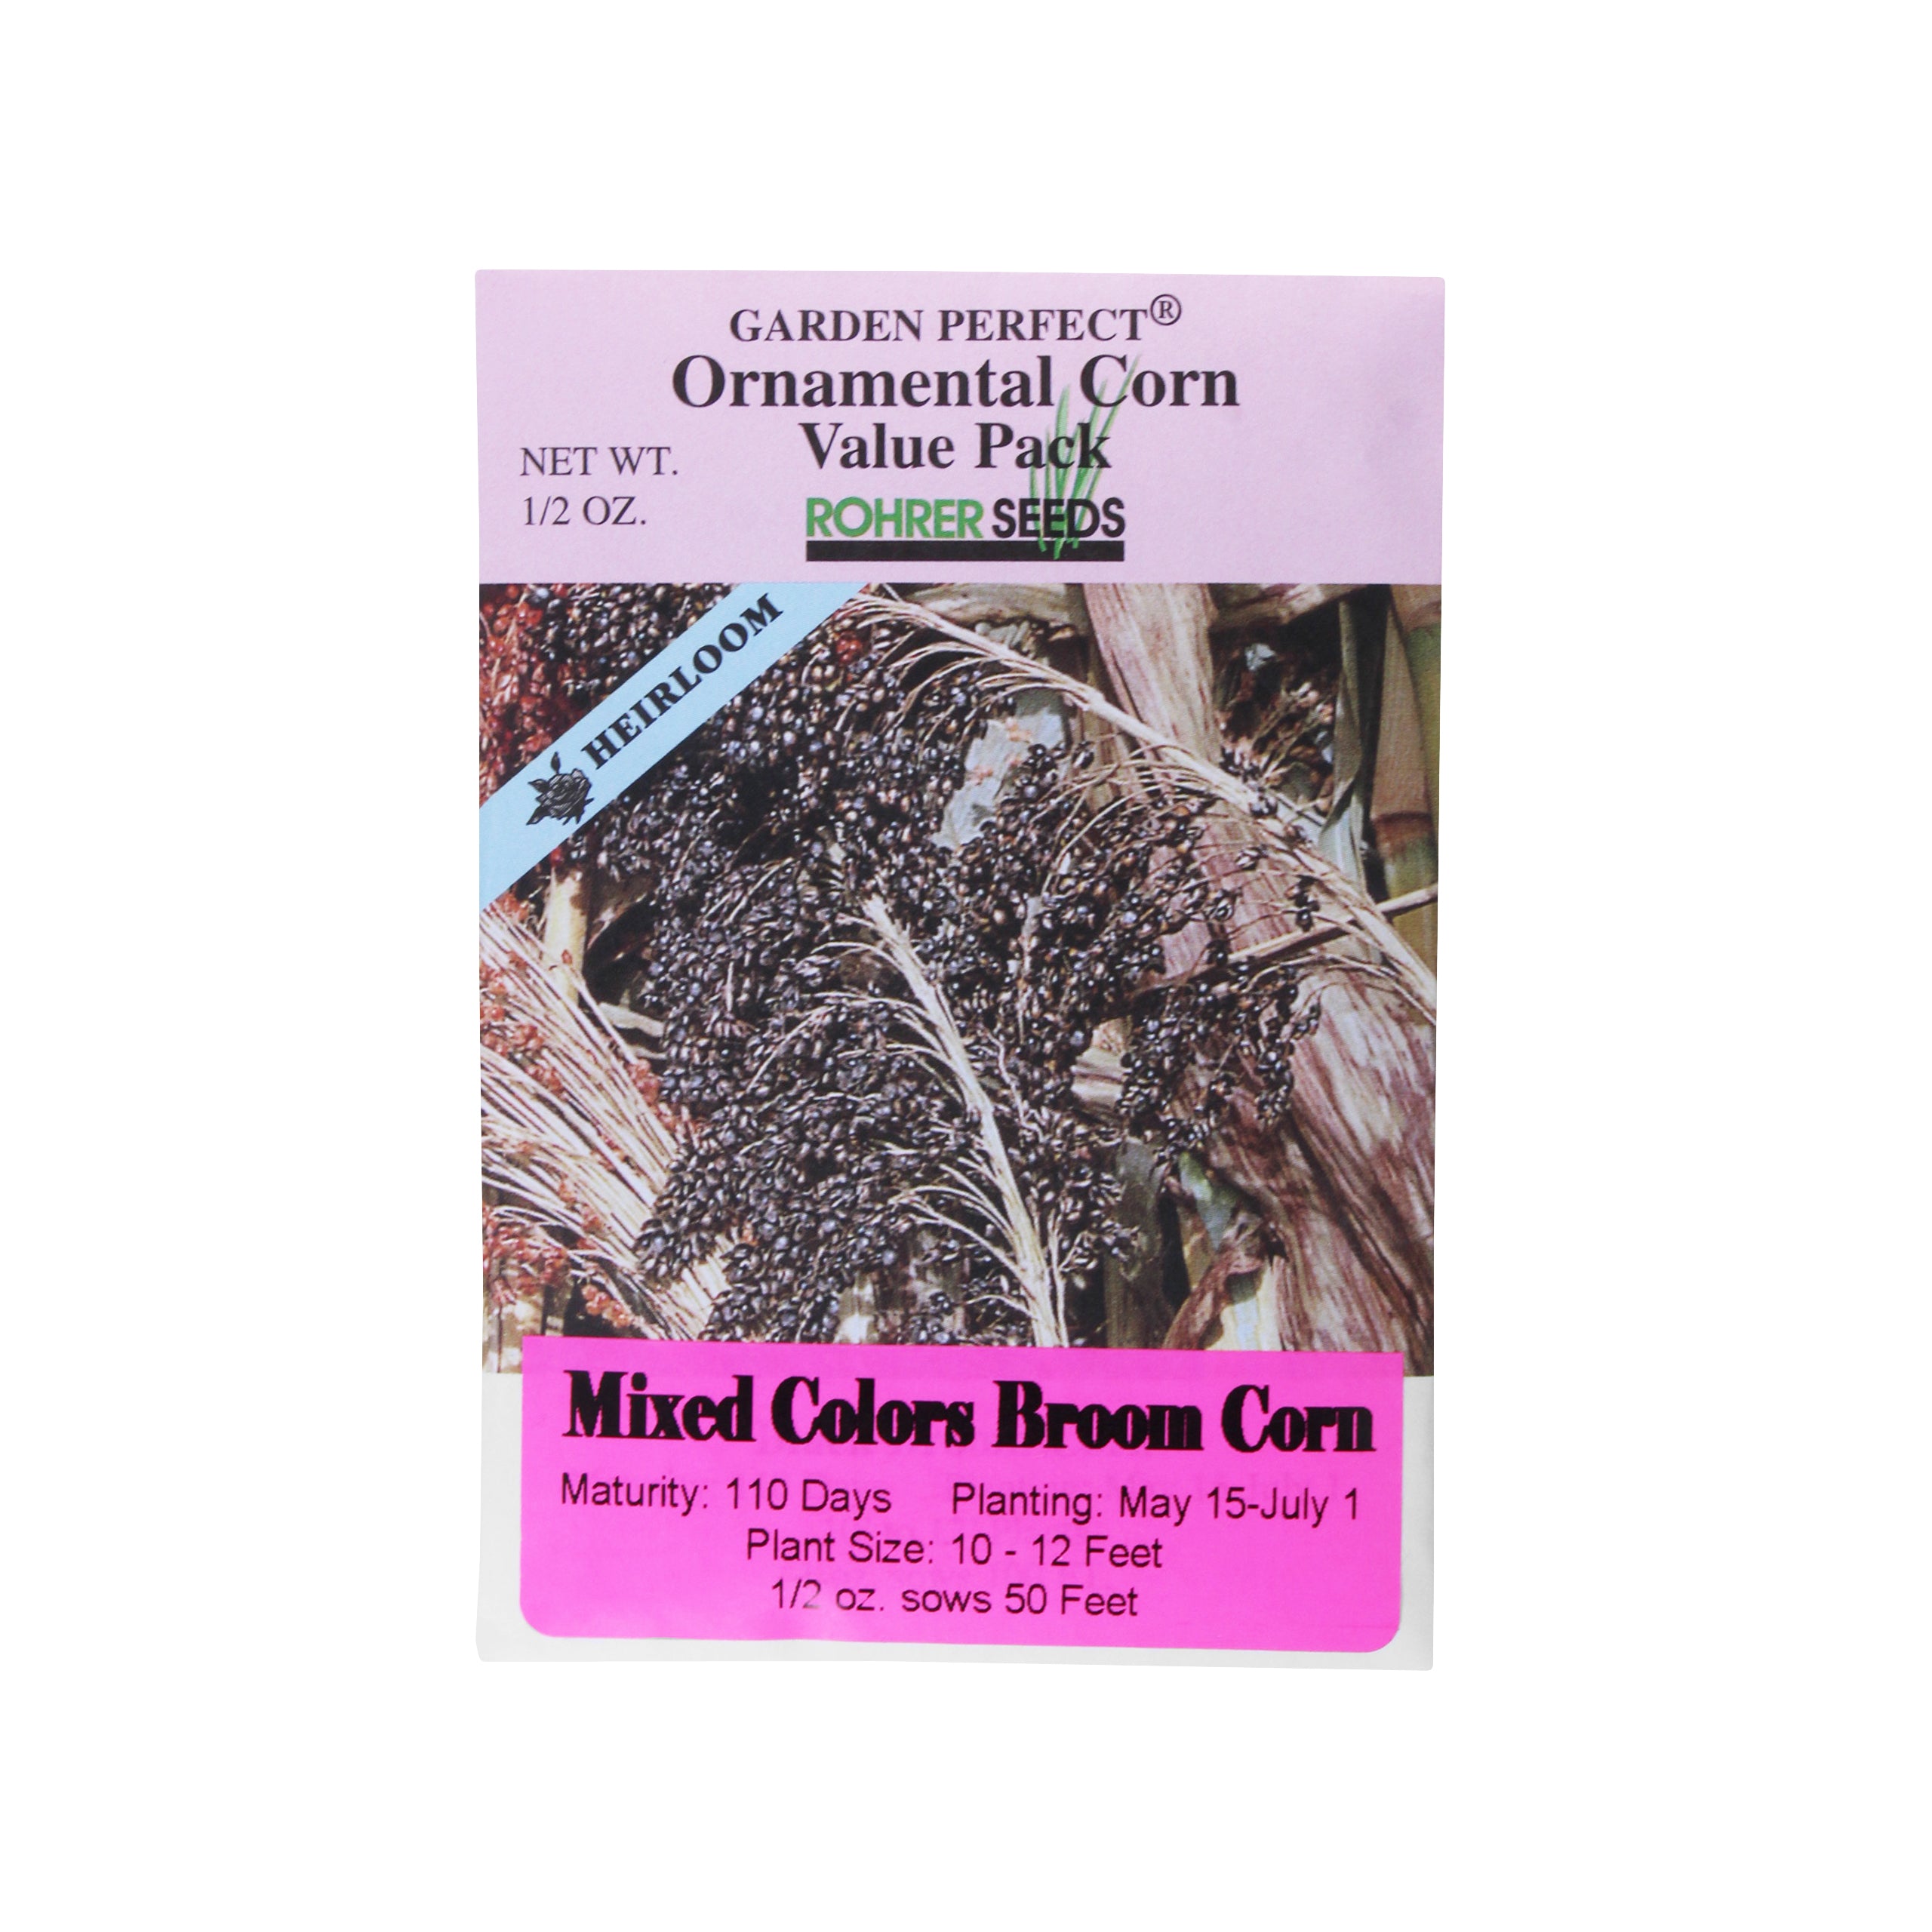 Rohrer Seeds Mixed Colors Broom Ornamental Corn Value Pack, 0.5oz Packet, Sows 50ft